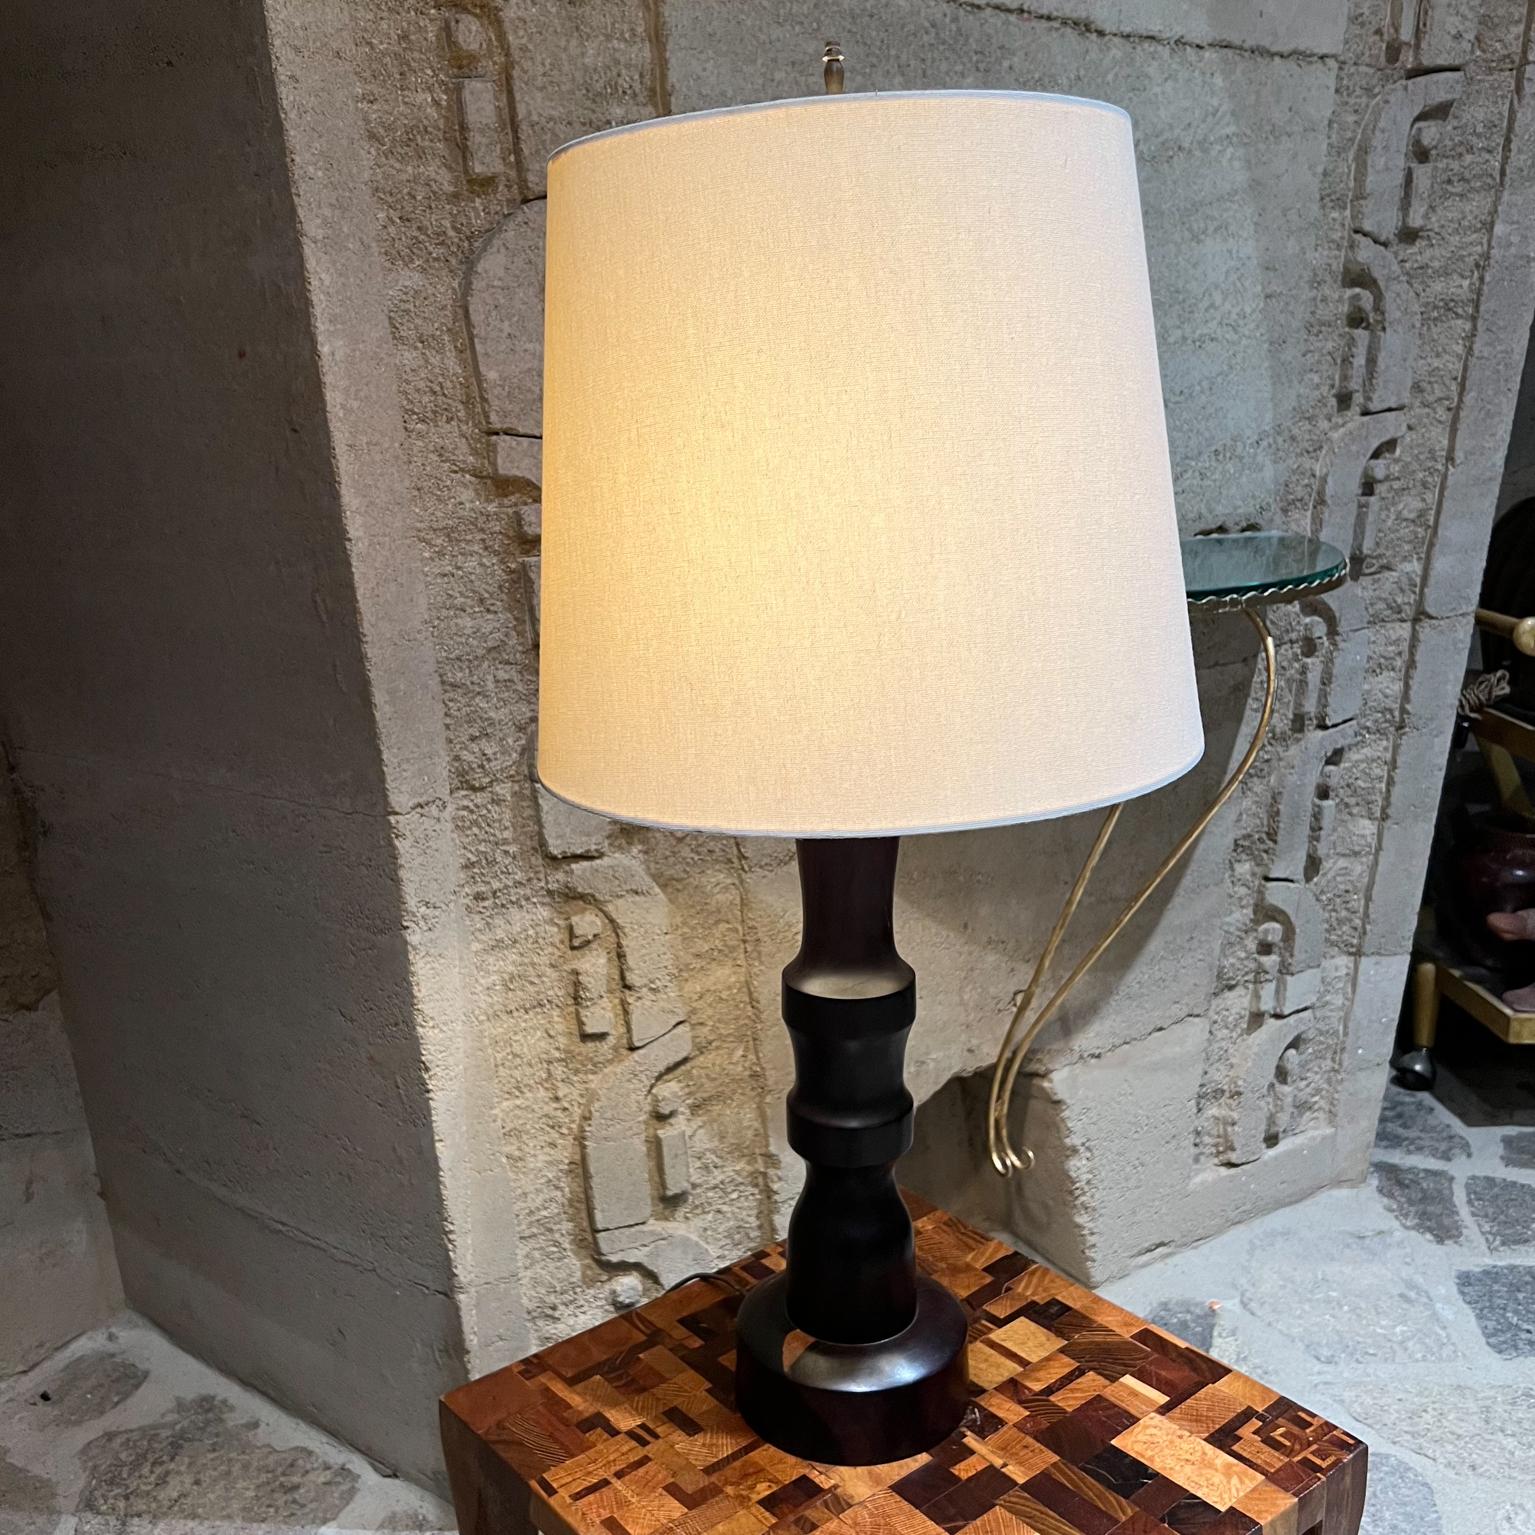 1950s Sculptural Spindle Table Lamp in Mexican Palo Fierro Desert Ironwood For Sale 3